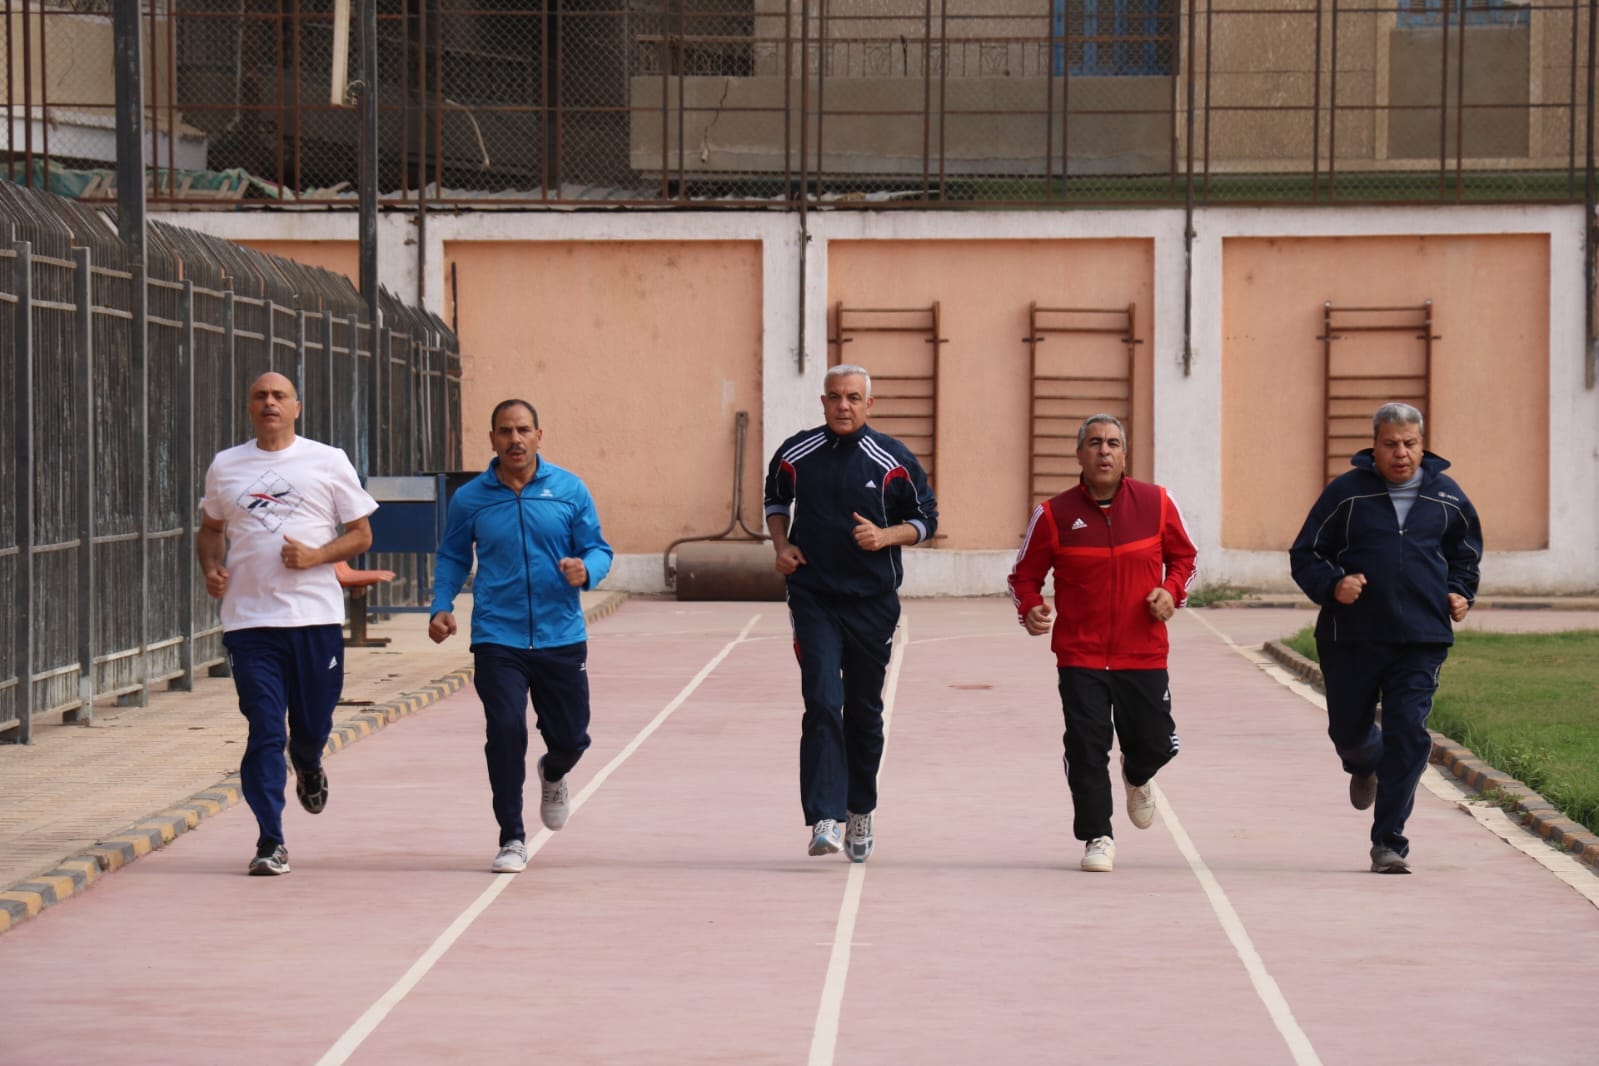 Follow-up to the initiative of the President of Menoufia University to exercise before working hours